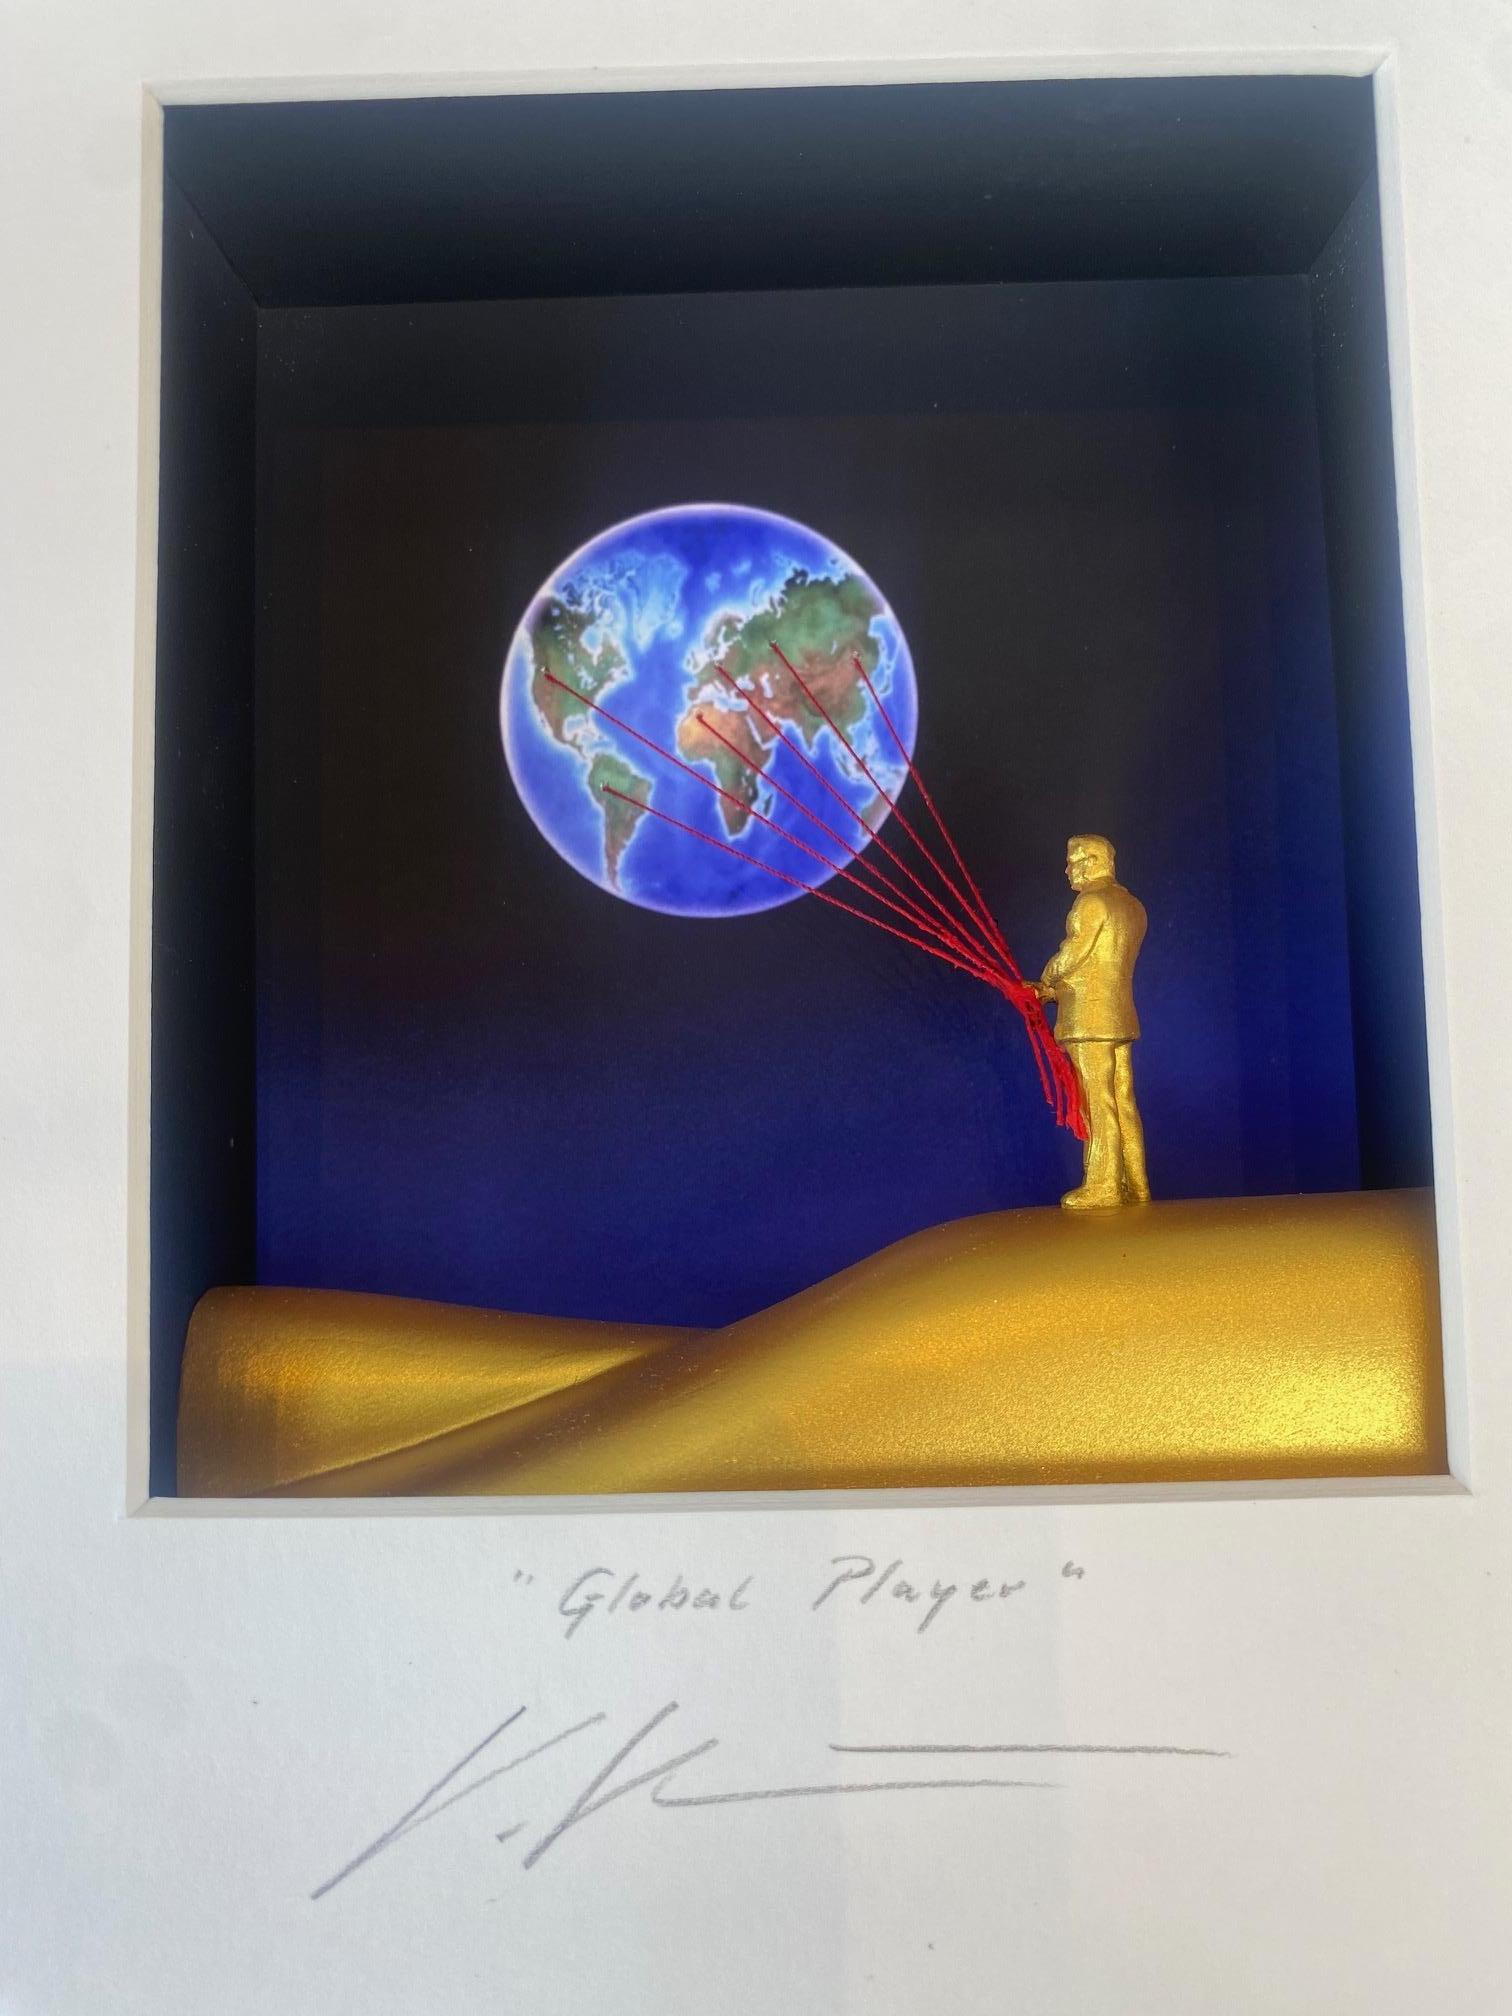 Global Player - contemporary art in boxes by Volker Kuhn of man holding globe For Sale 2